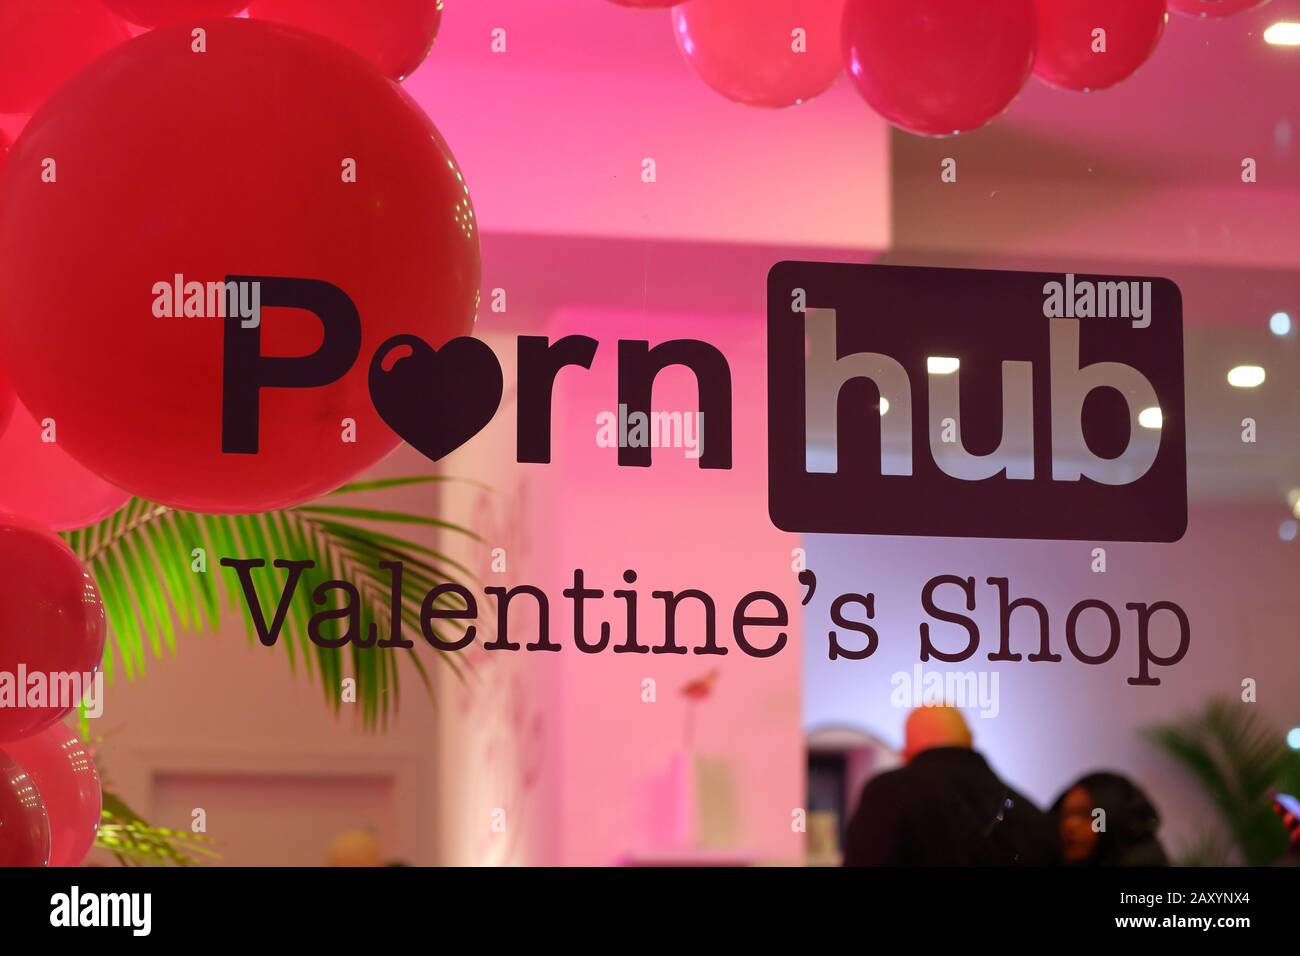 [historical storefront] Pornhub Valentine's Shop, 91 Allen St, NYC storefront photo of an adult entertainment pop-up in the Lower East Side February 2 Stock Photo